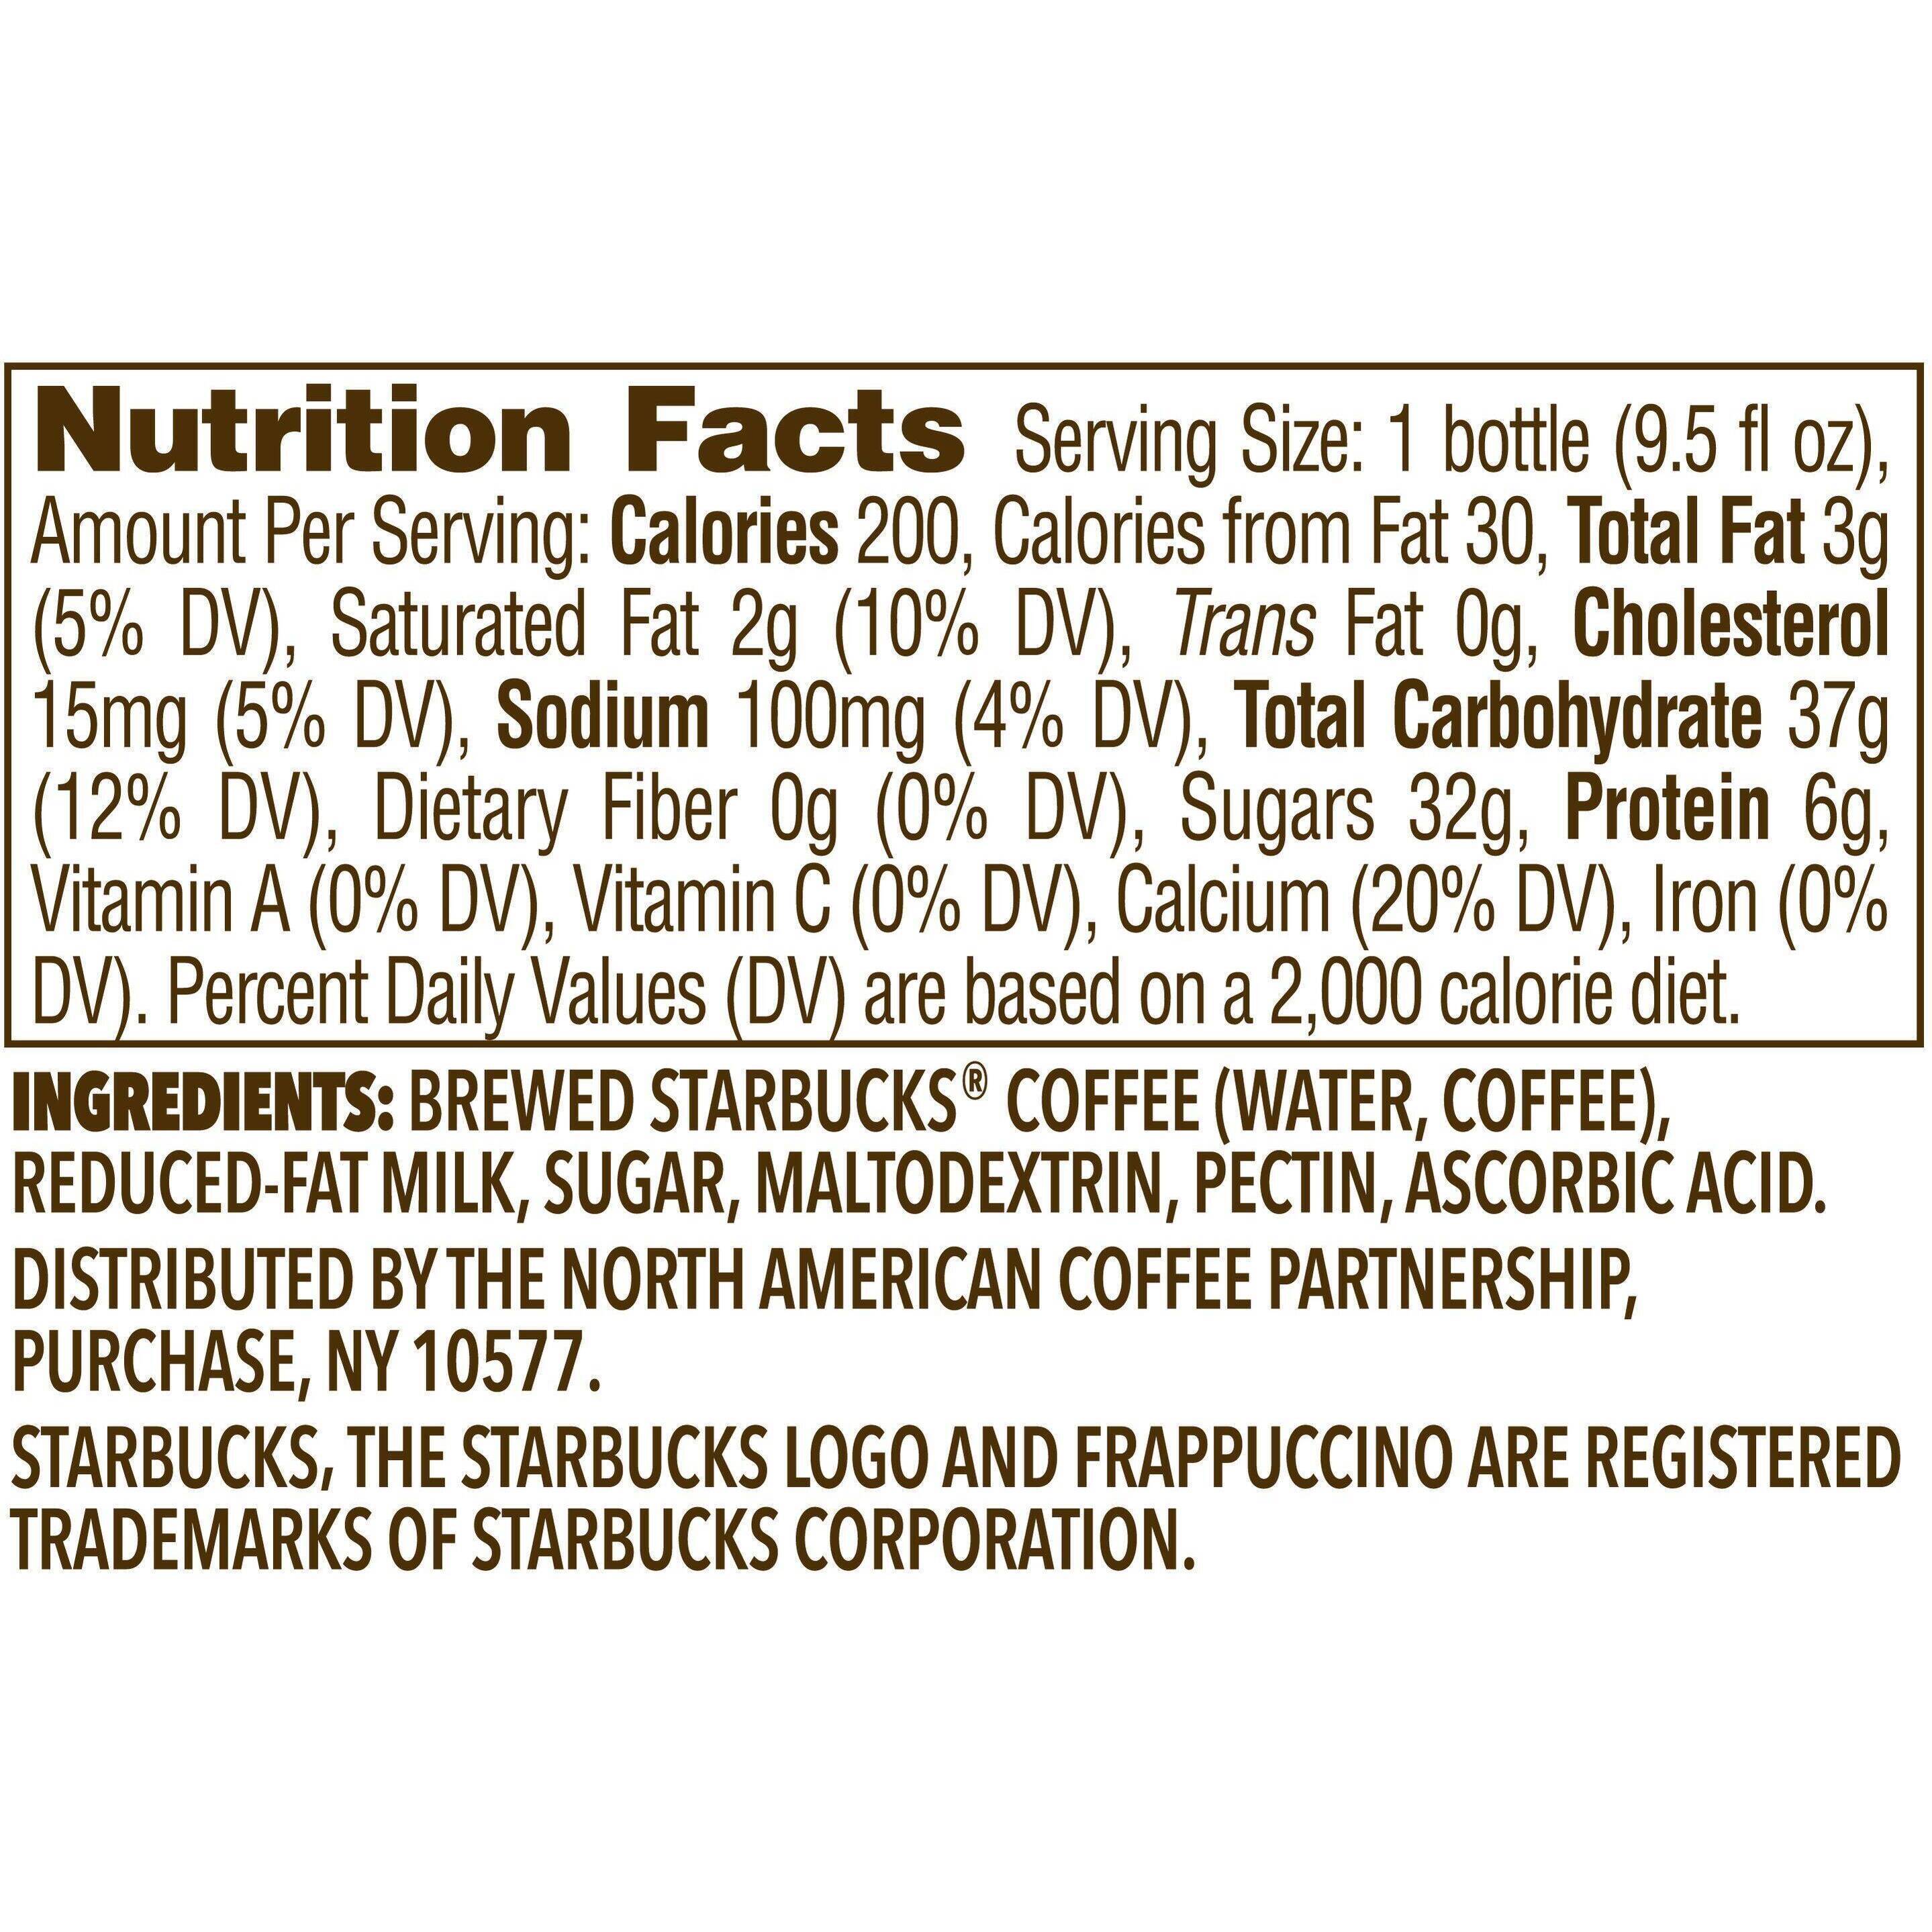 Image describing nutrition information for product Frappuccino Coffee